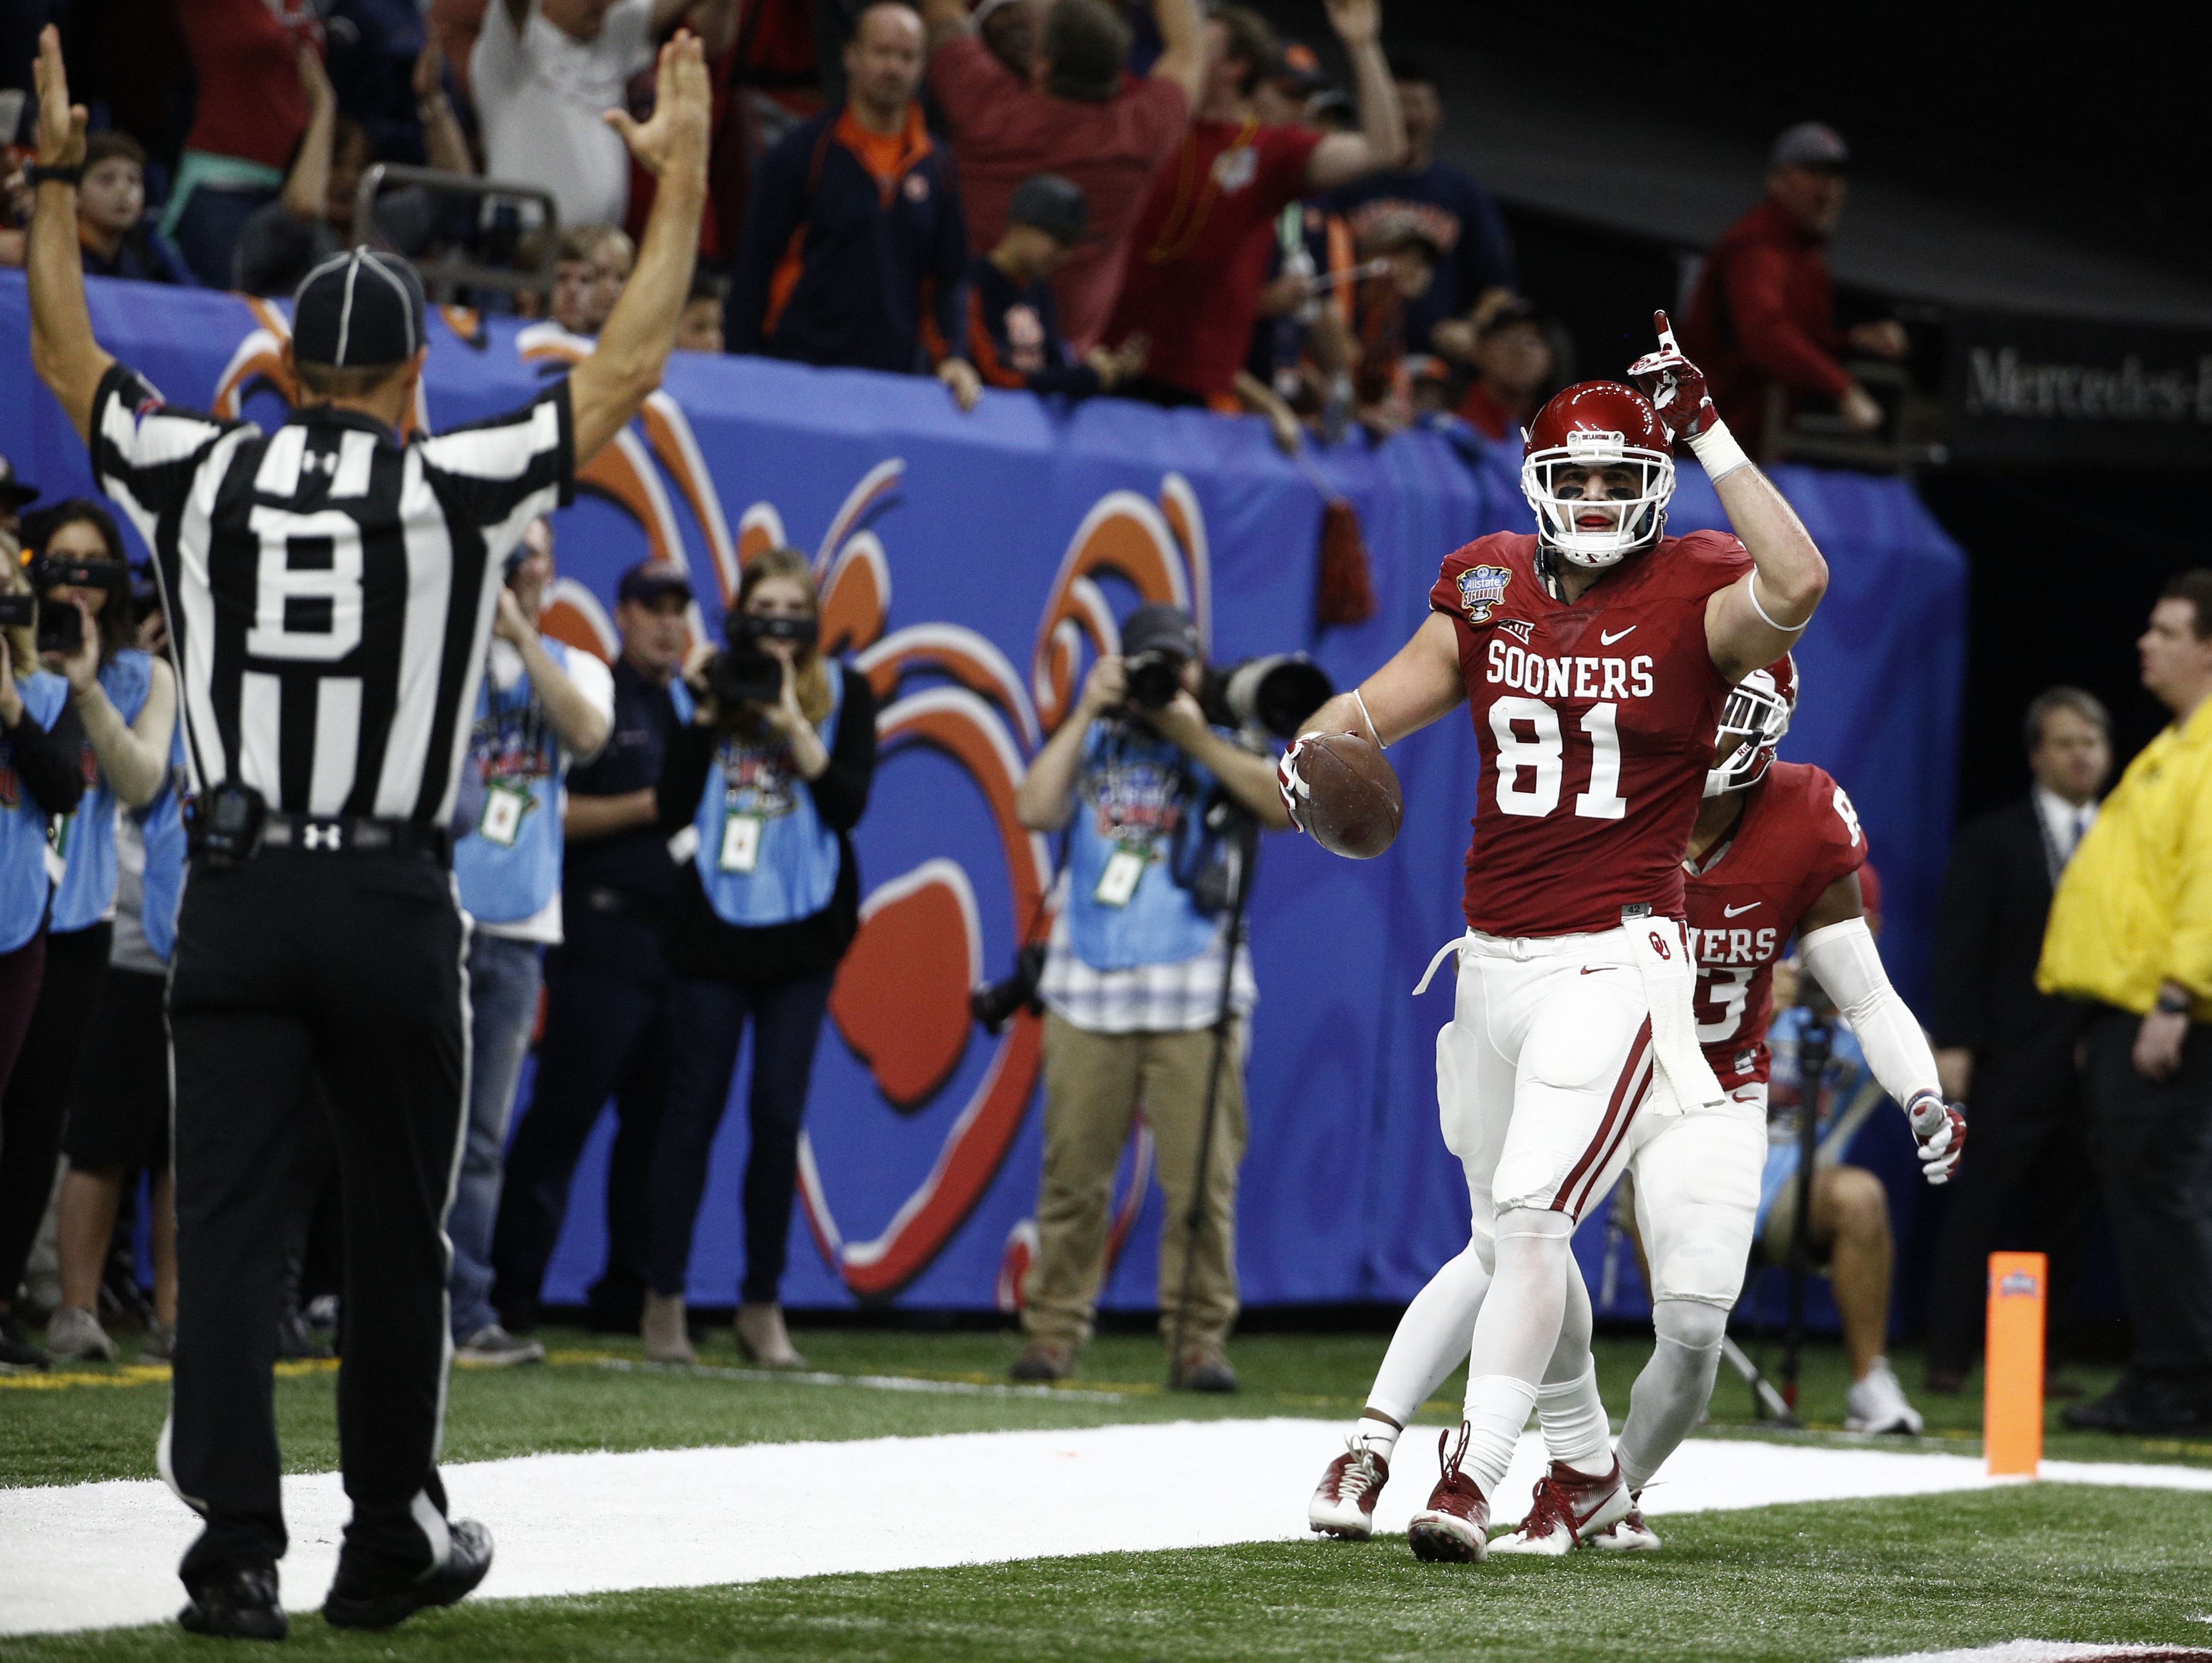 Oklahoma Sooners wide receiver Mark Andrews (81) reacts after catching a pass for a touchdown against the Auburn Tigers in the second quarter of the 2017 Sugar Bowl at the Mercedes-Benz Superdome.